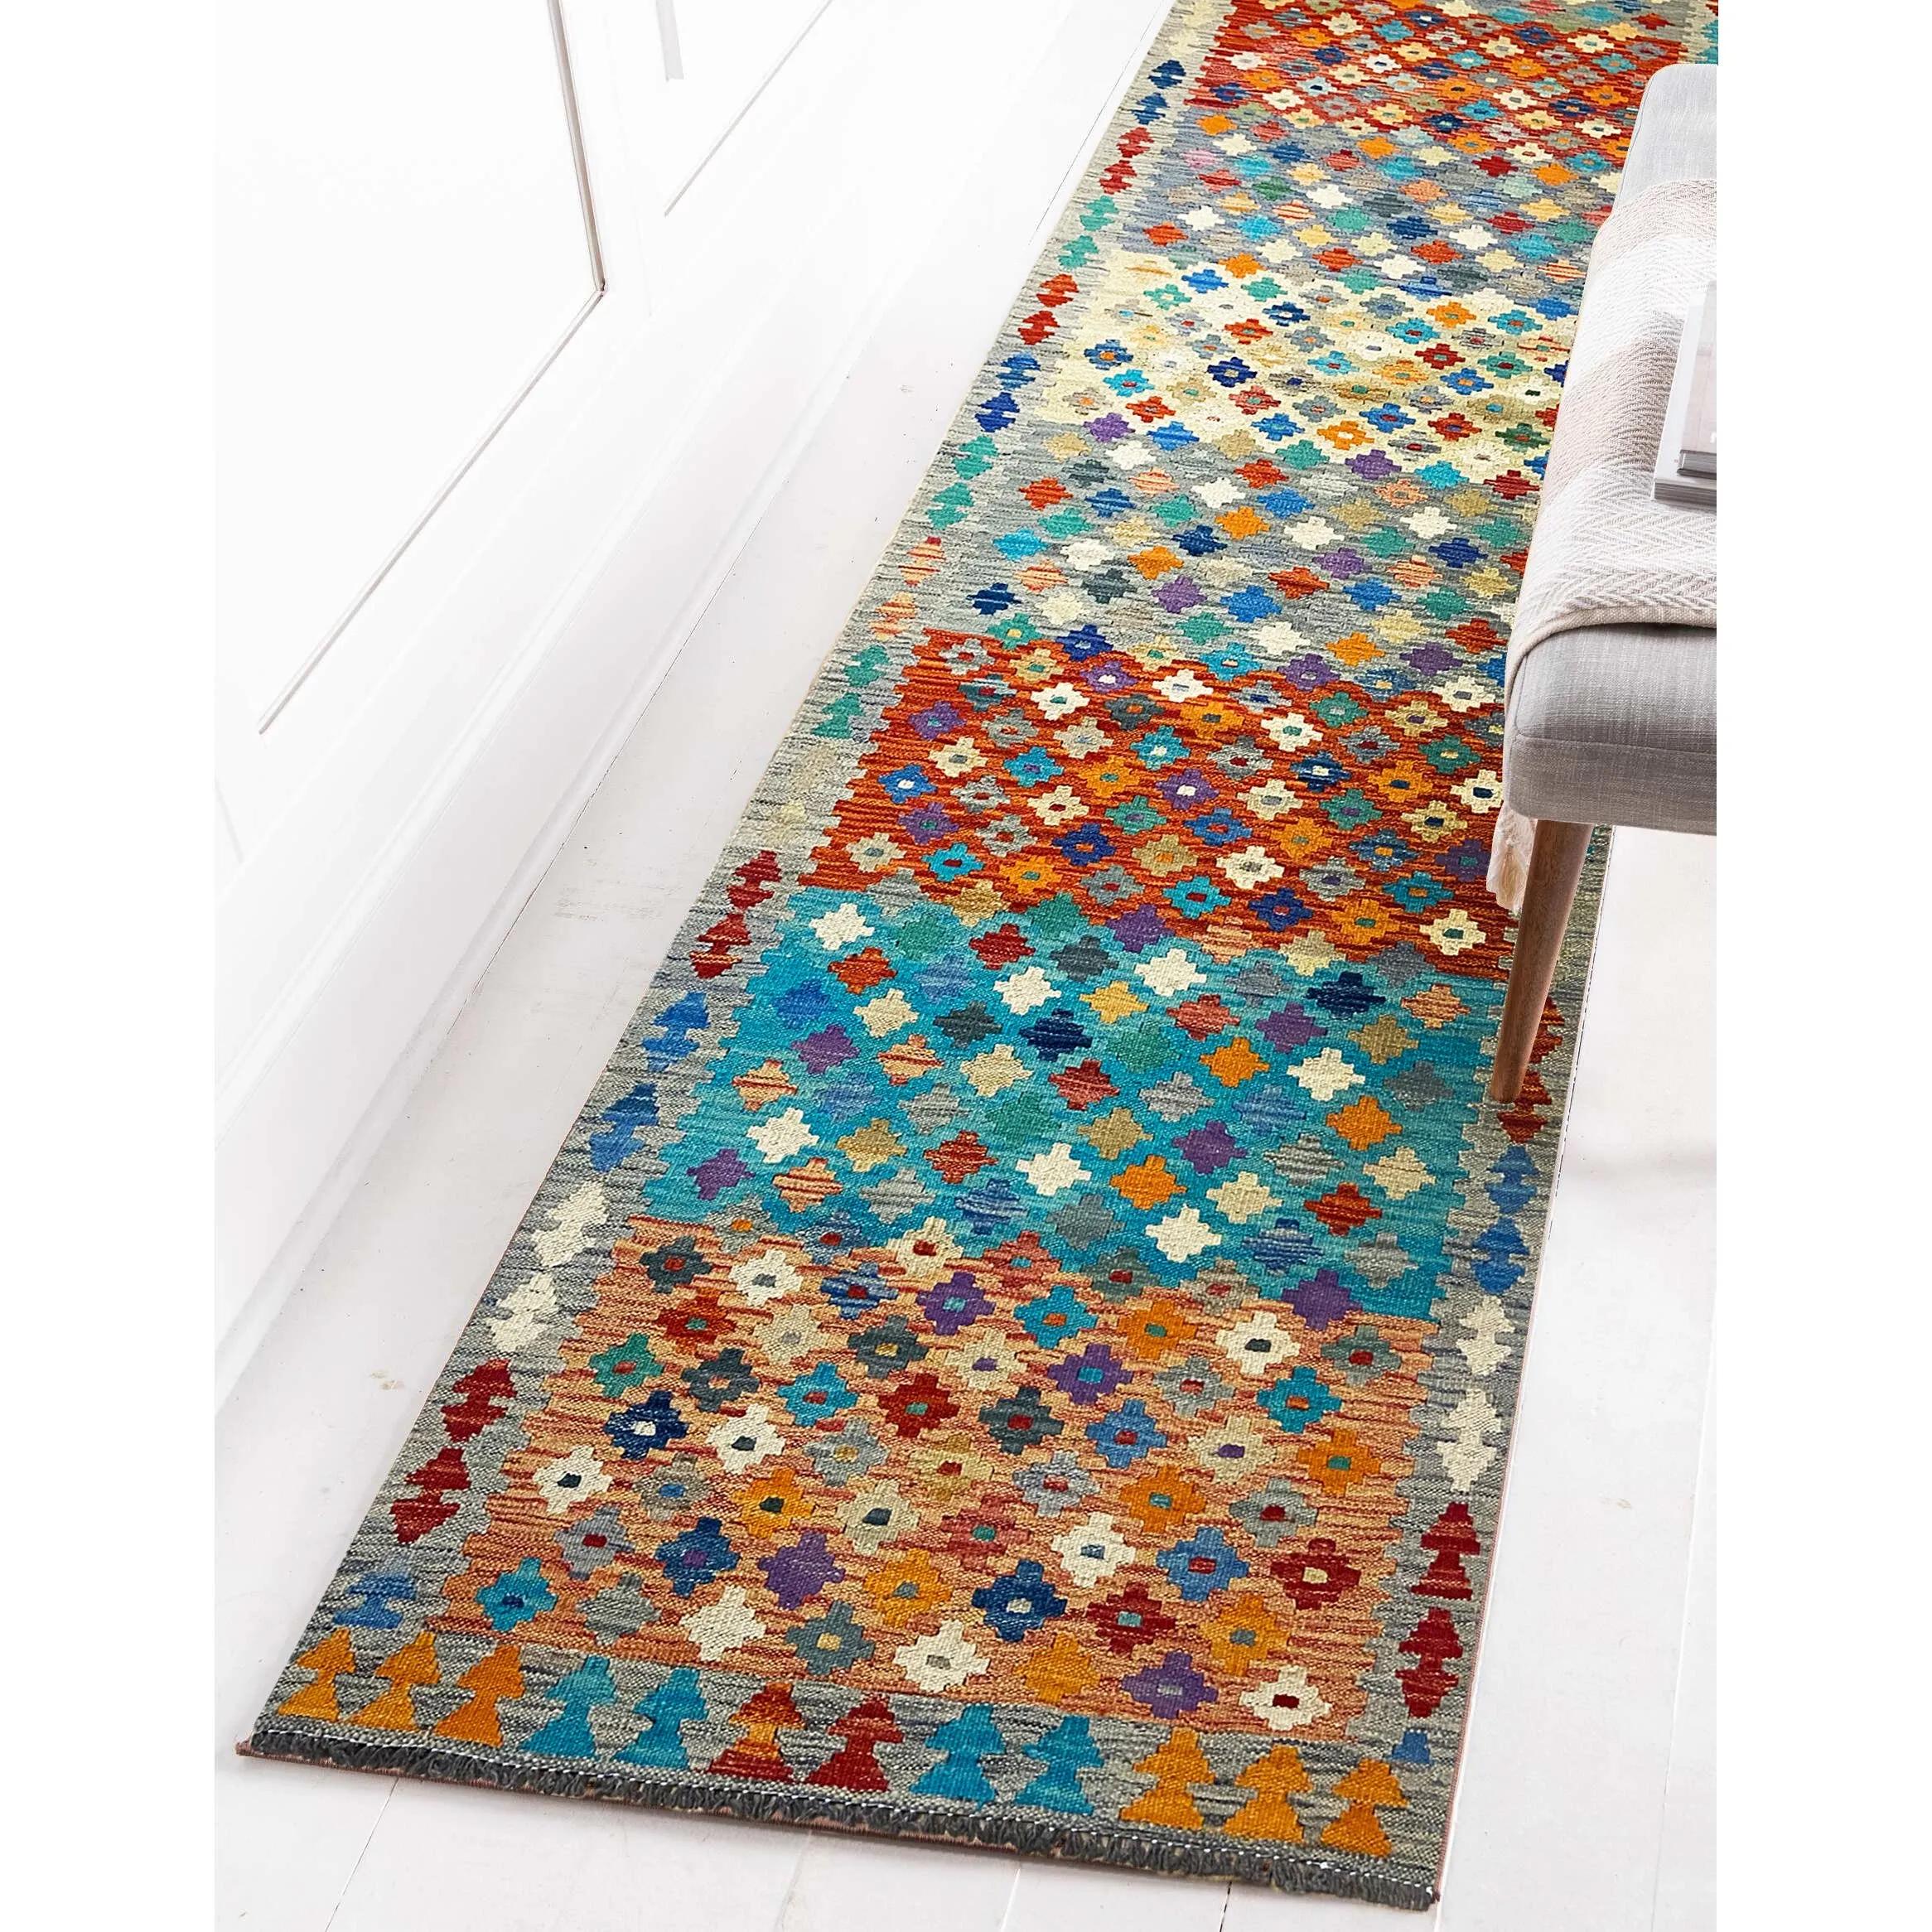 Afghan All Wool Colorful Kilim Runner 2′ 9″ x 9′ 7″ For Sale